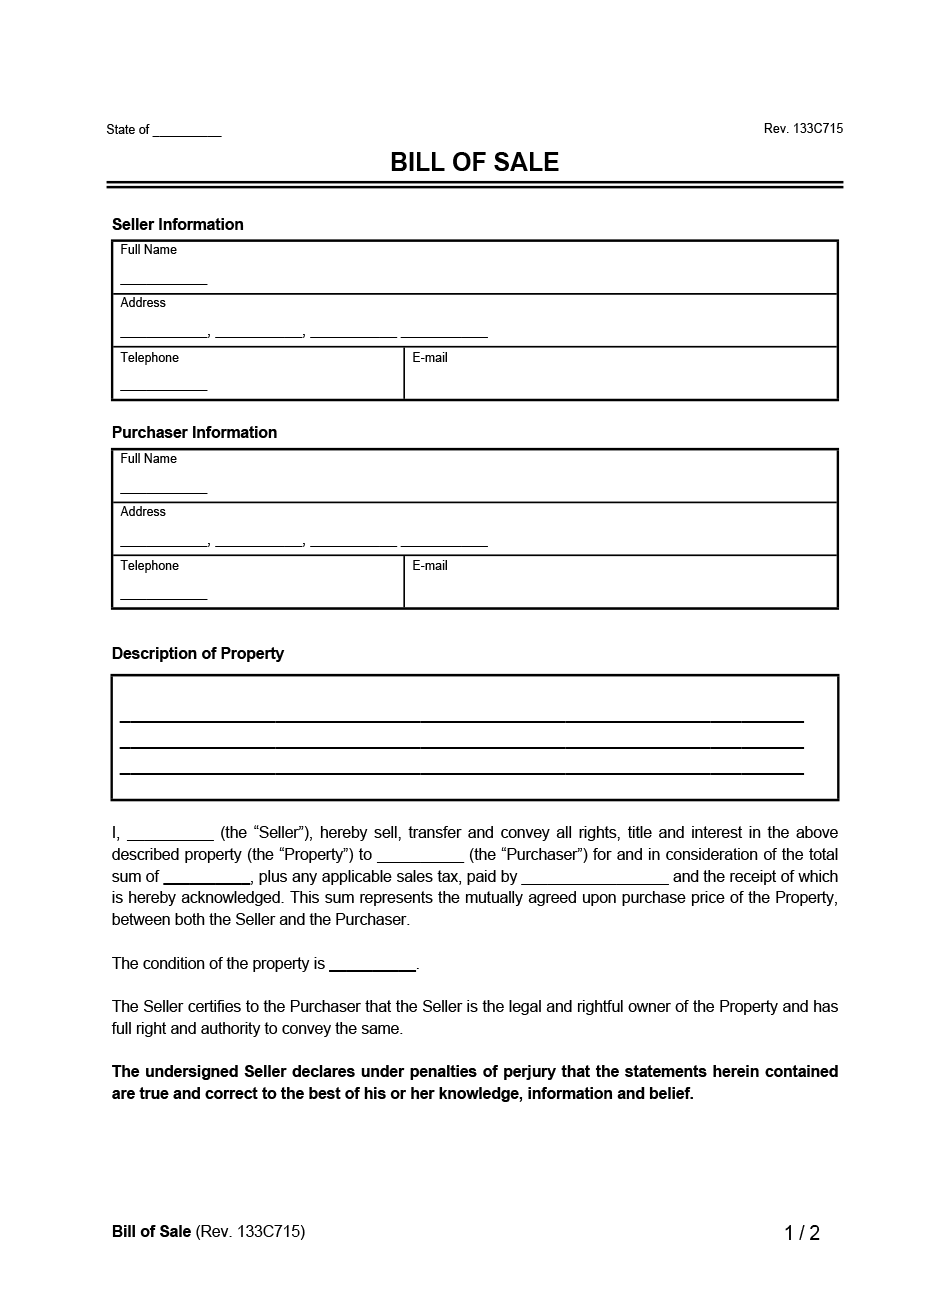 Leave Of Absence Form Template